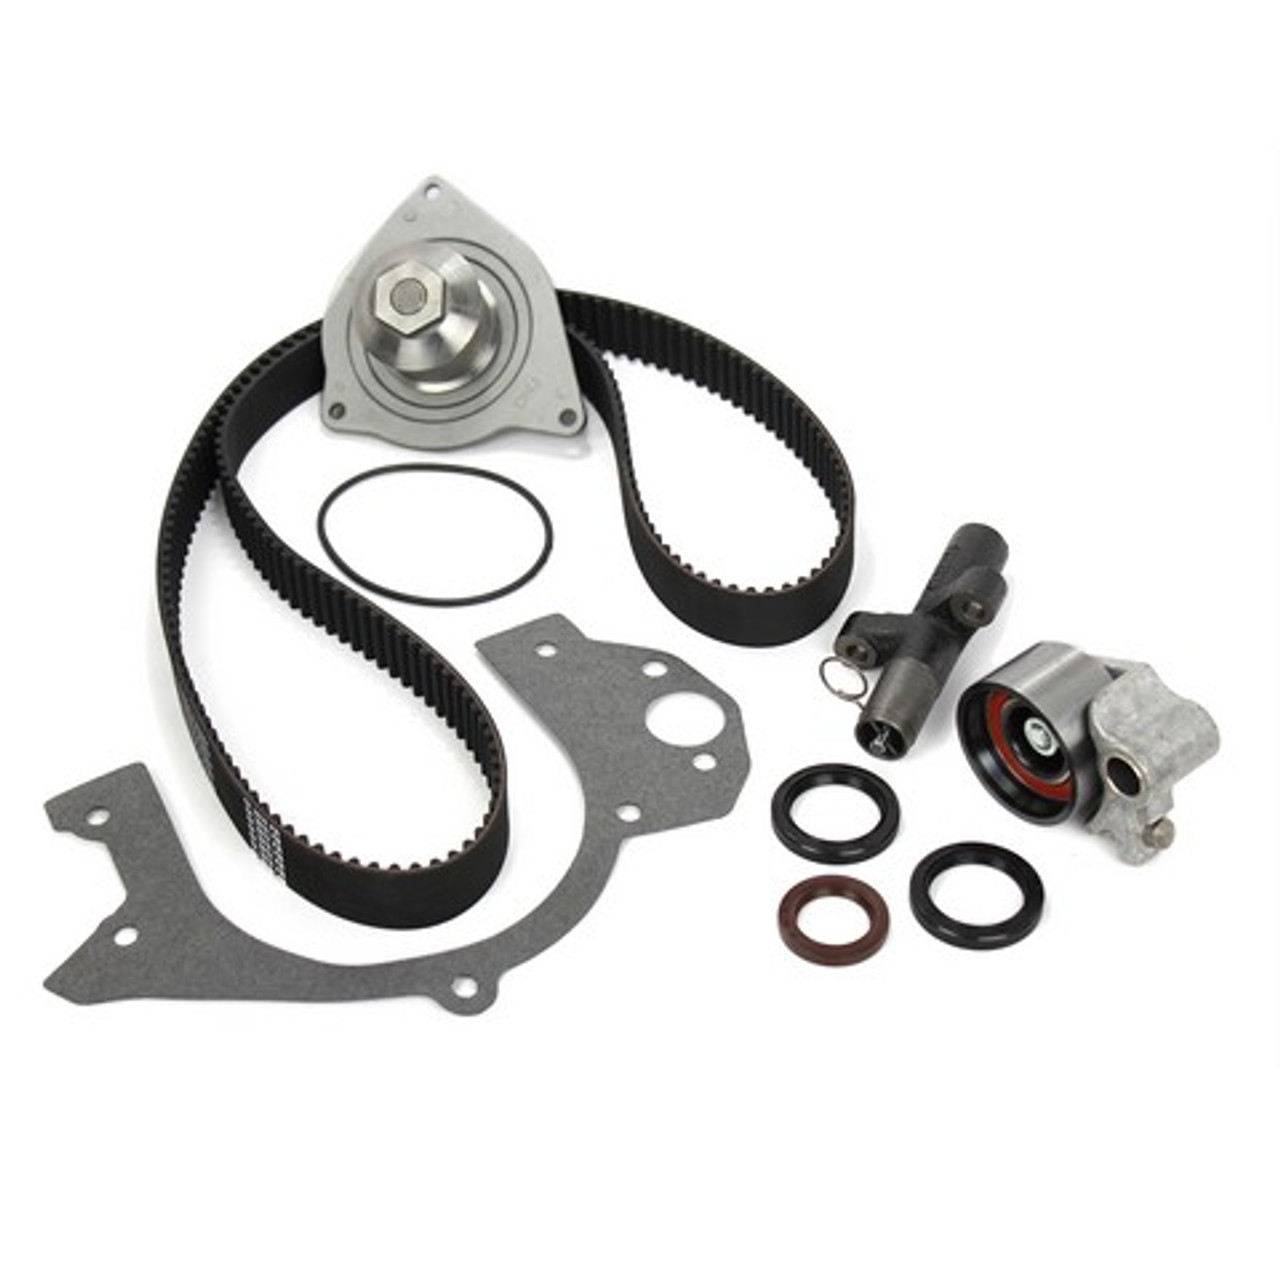 1993 Eagle Vision 3.5L Timing Belt Kit with Water Pump TBK1145WP.E7